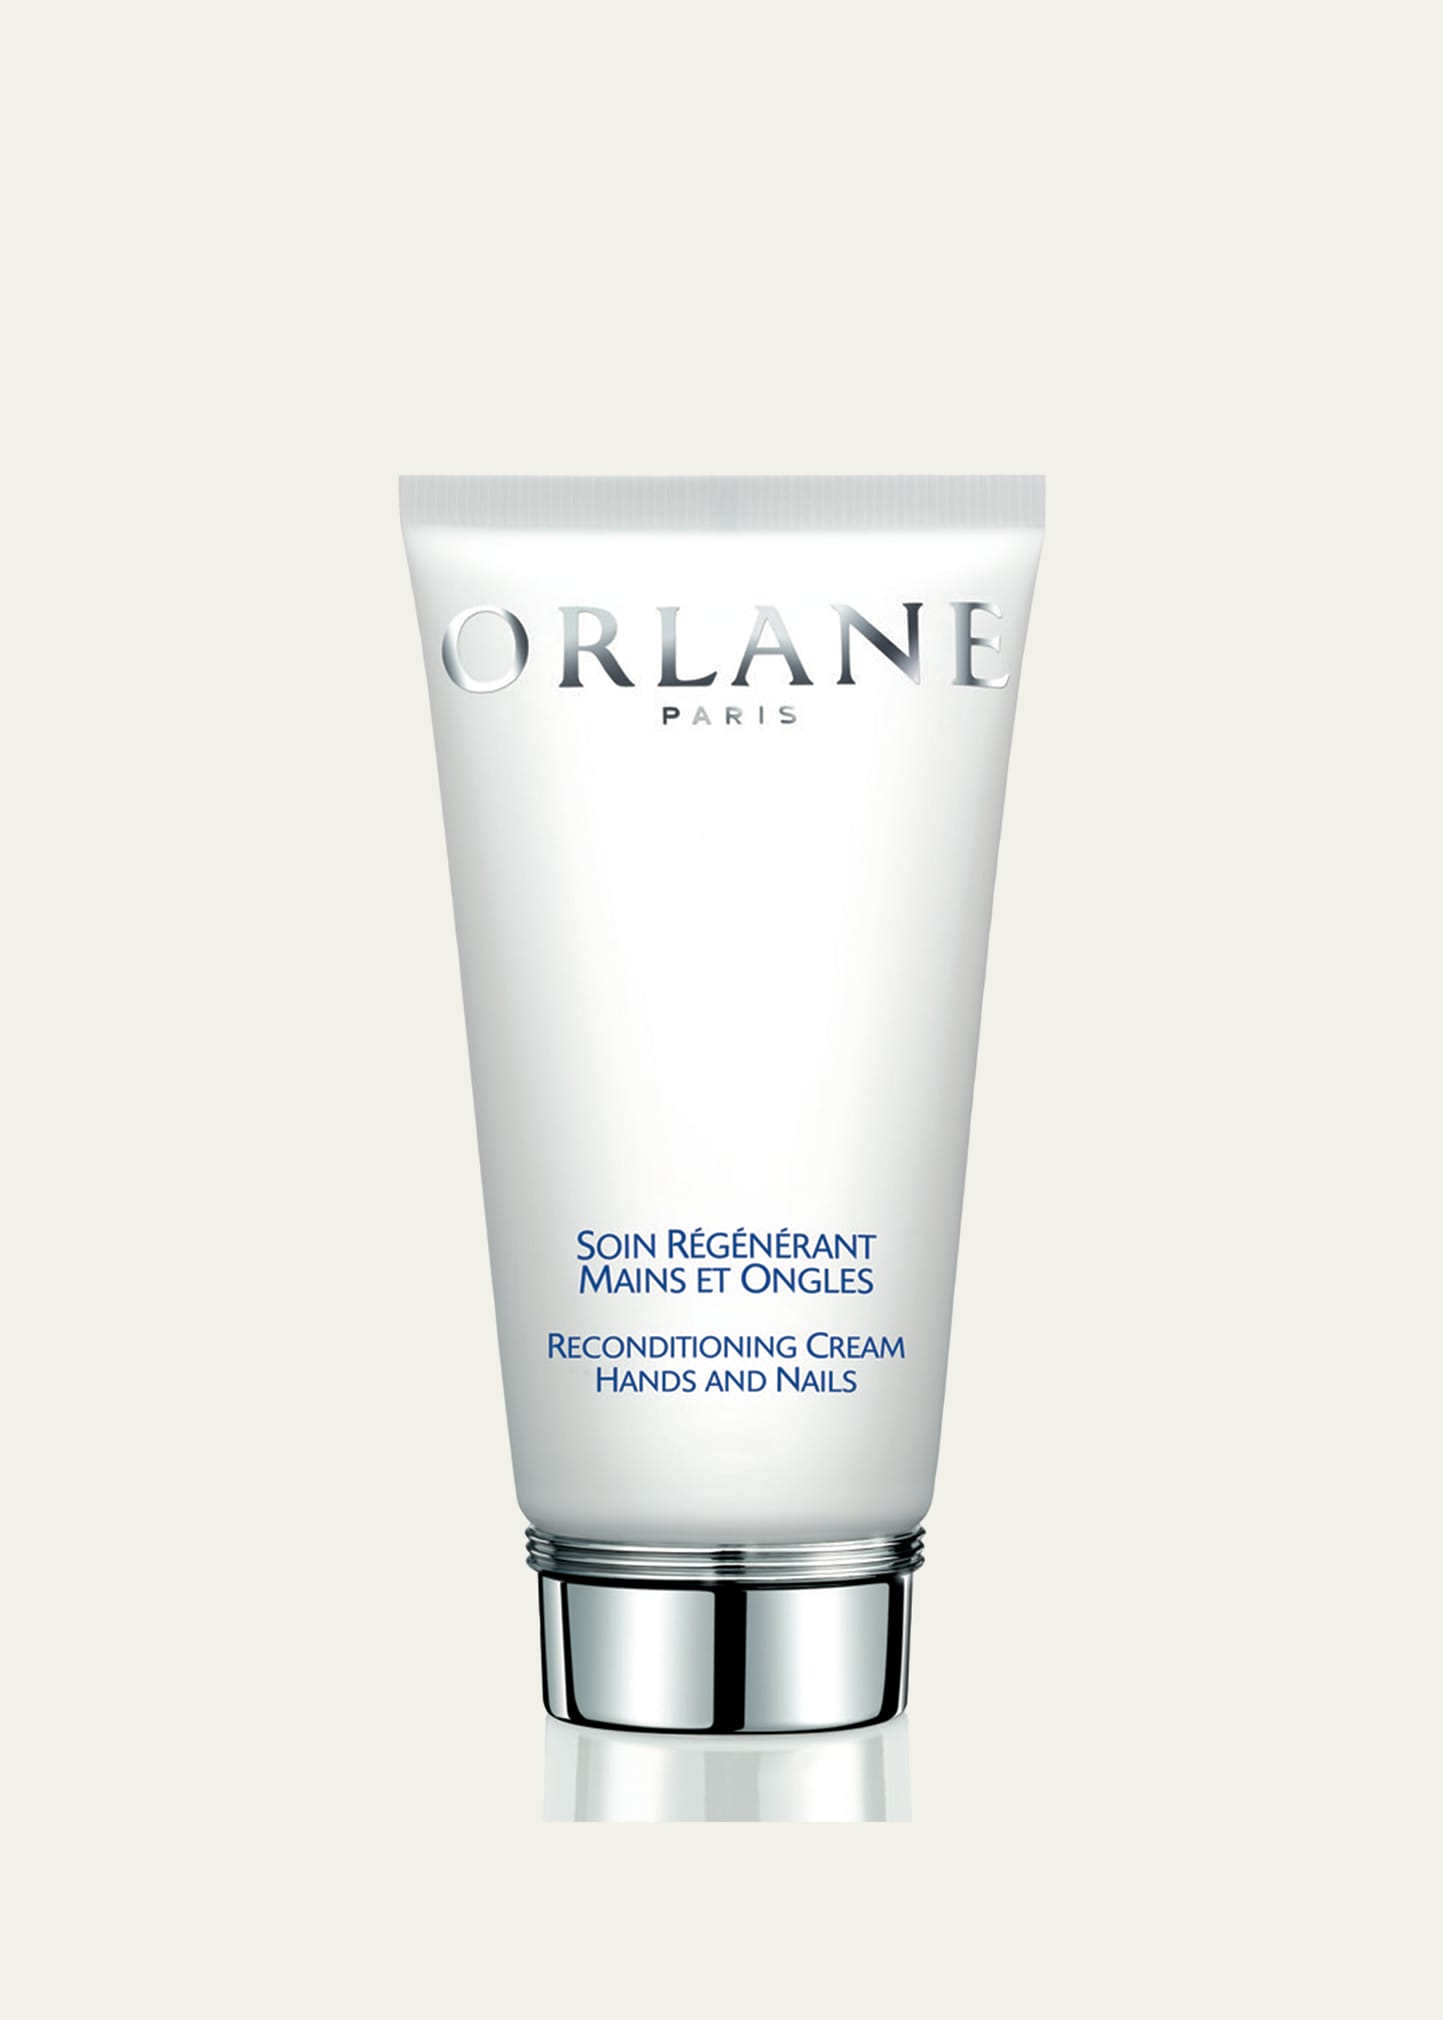 2.5 oz. Reconditioning Cream Hand and Nails